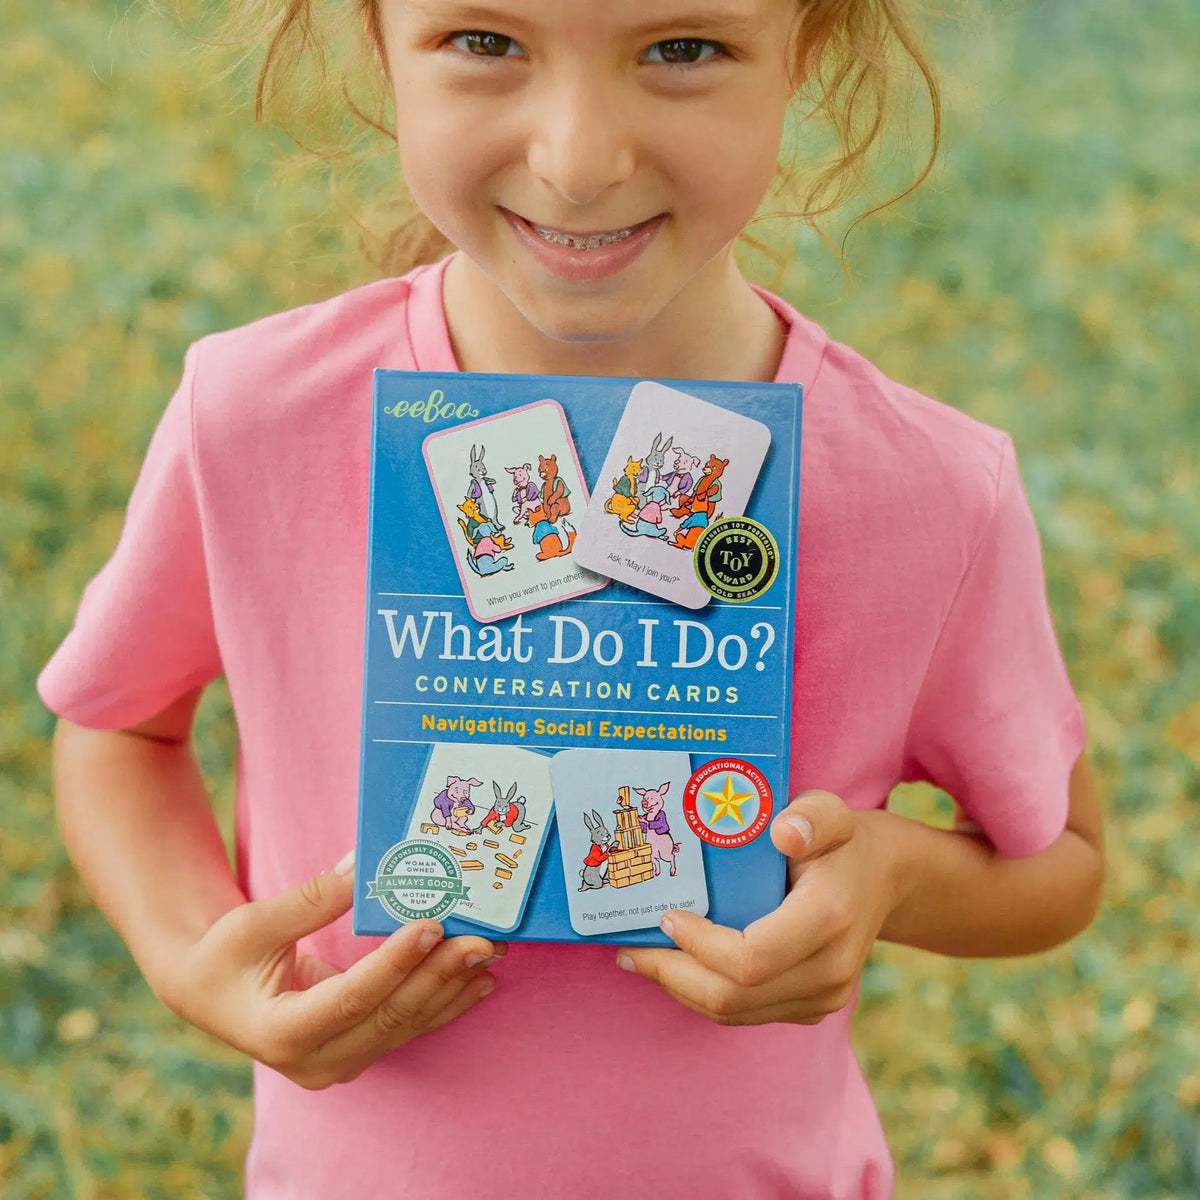 Front view of a young girl holding a box of the What Do I Do? Conversation Cards.